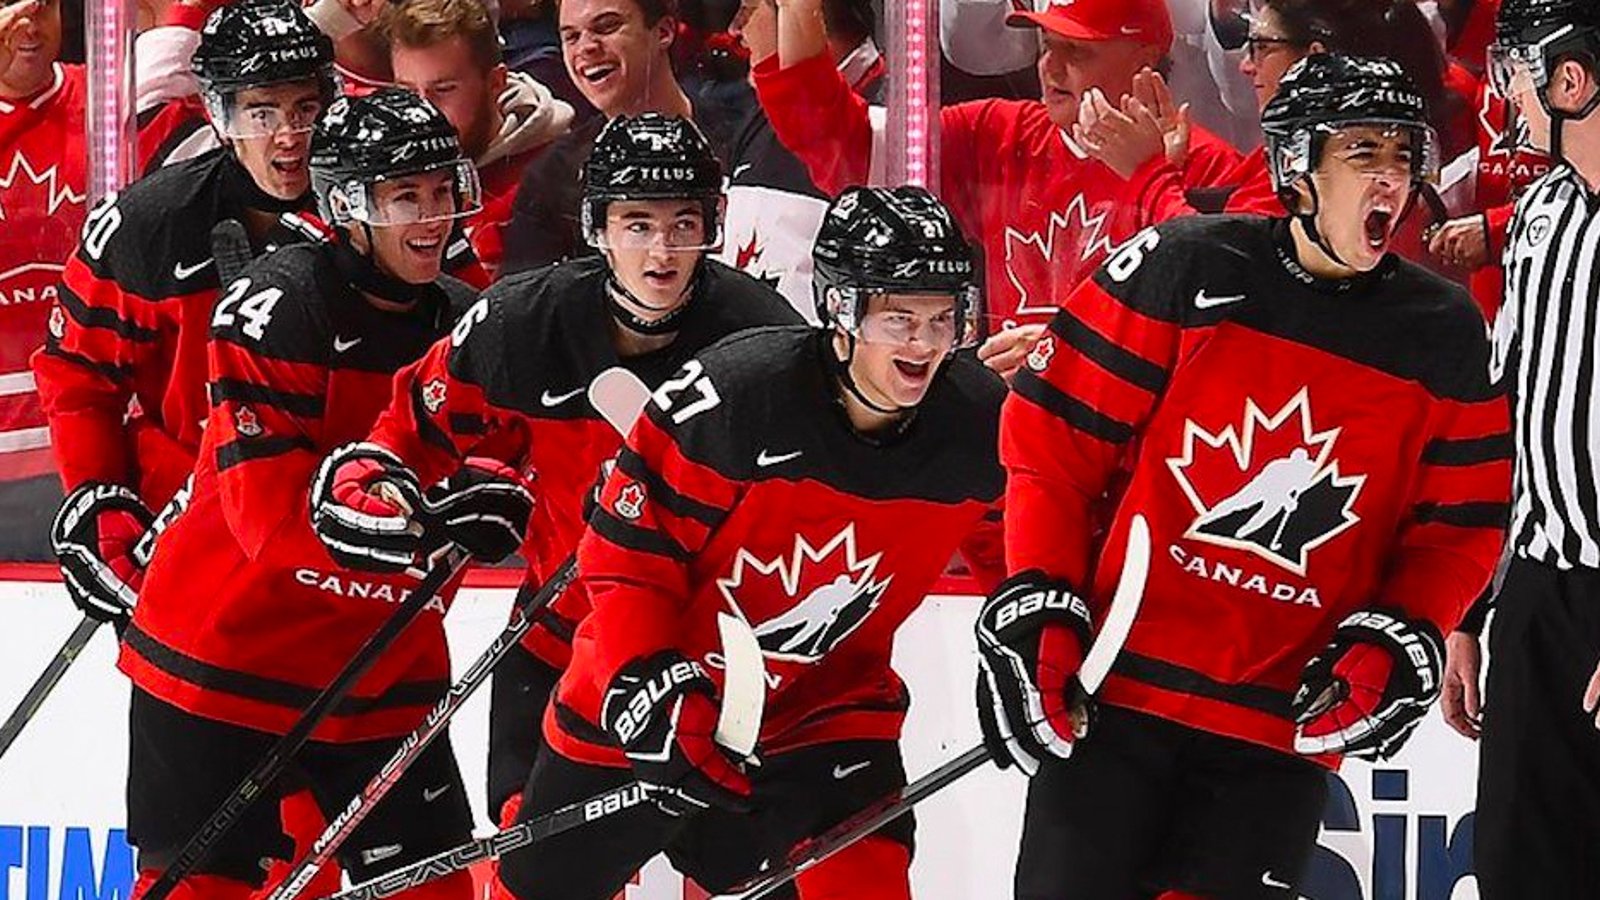 Team Canada's goal song for World Juniors is getting mixed reviews